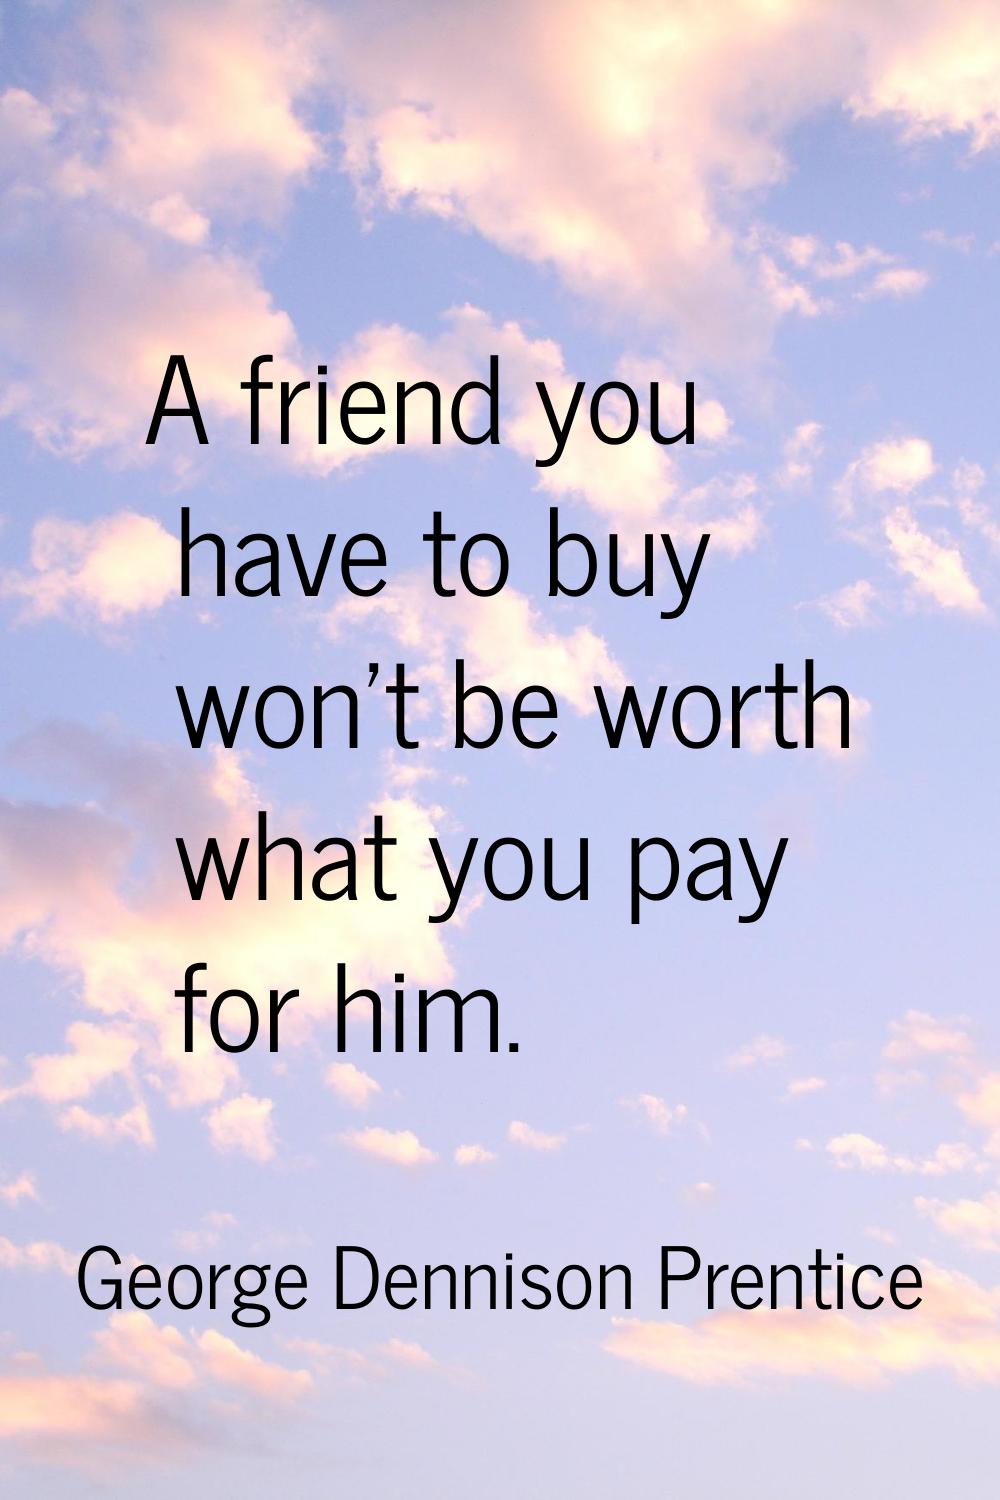 A friend you have to buy won't be worth what you pay for him.